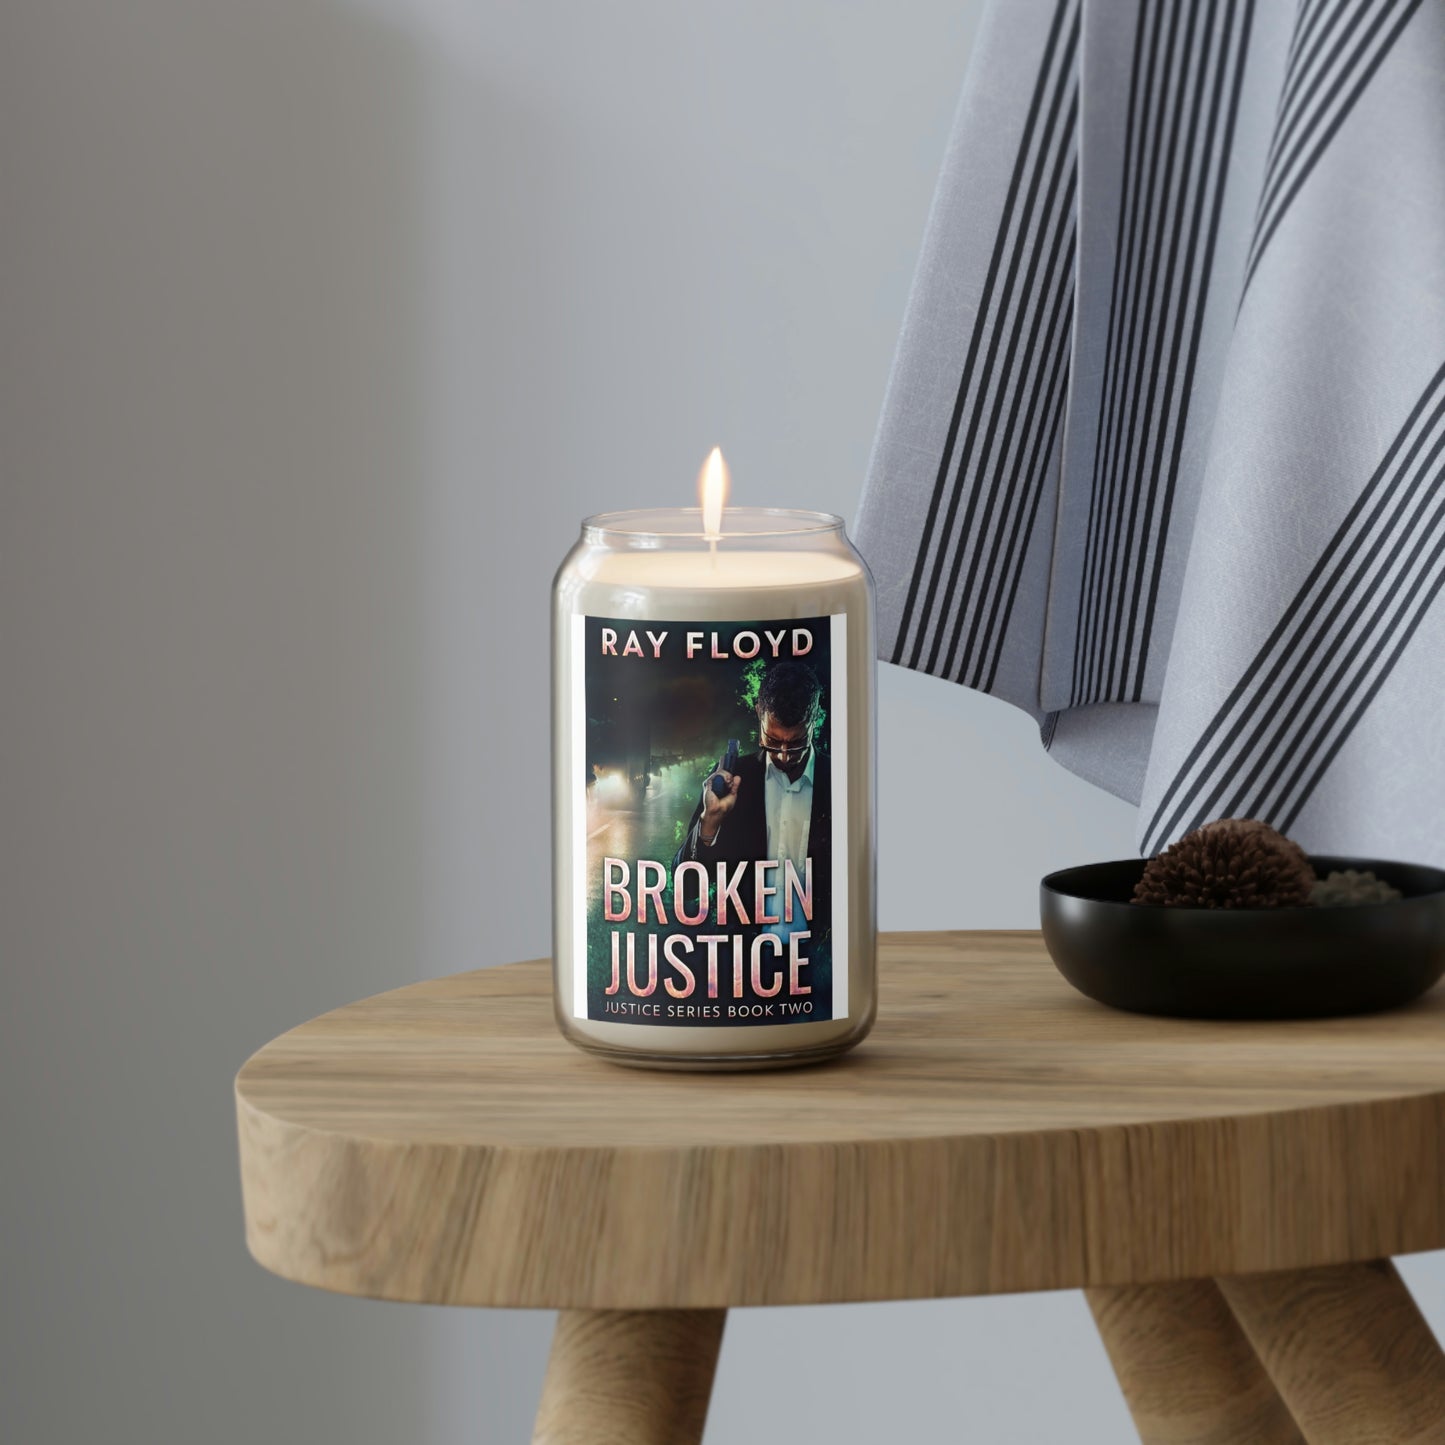 Broken Justice - Scented Candle